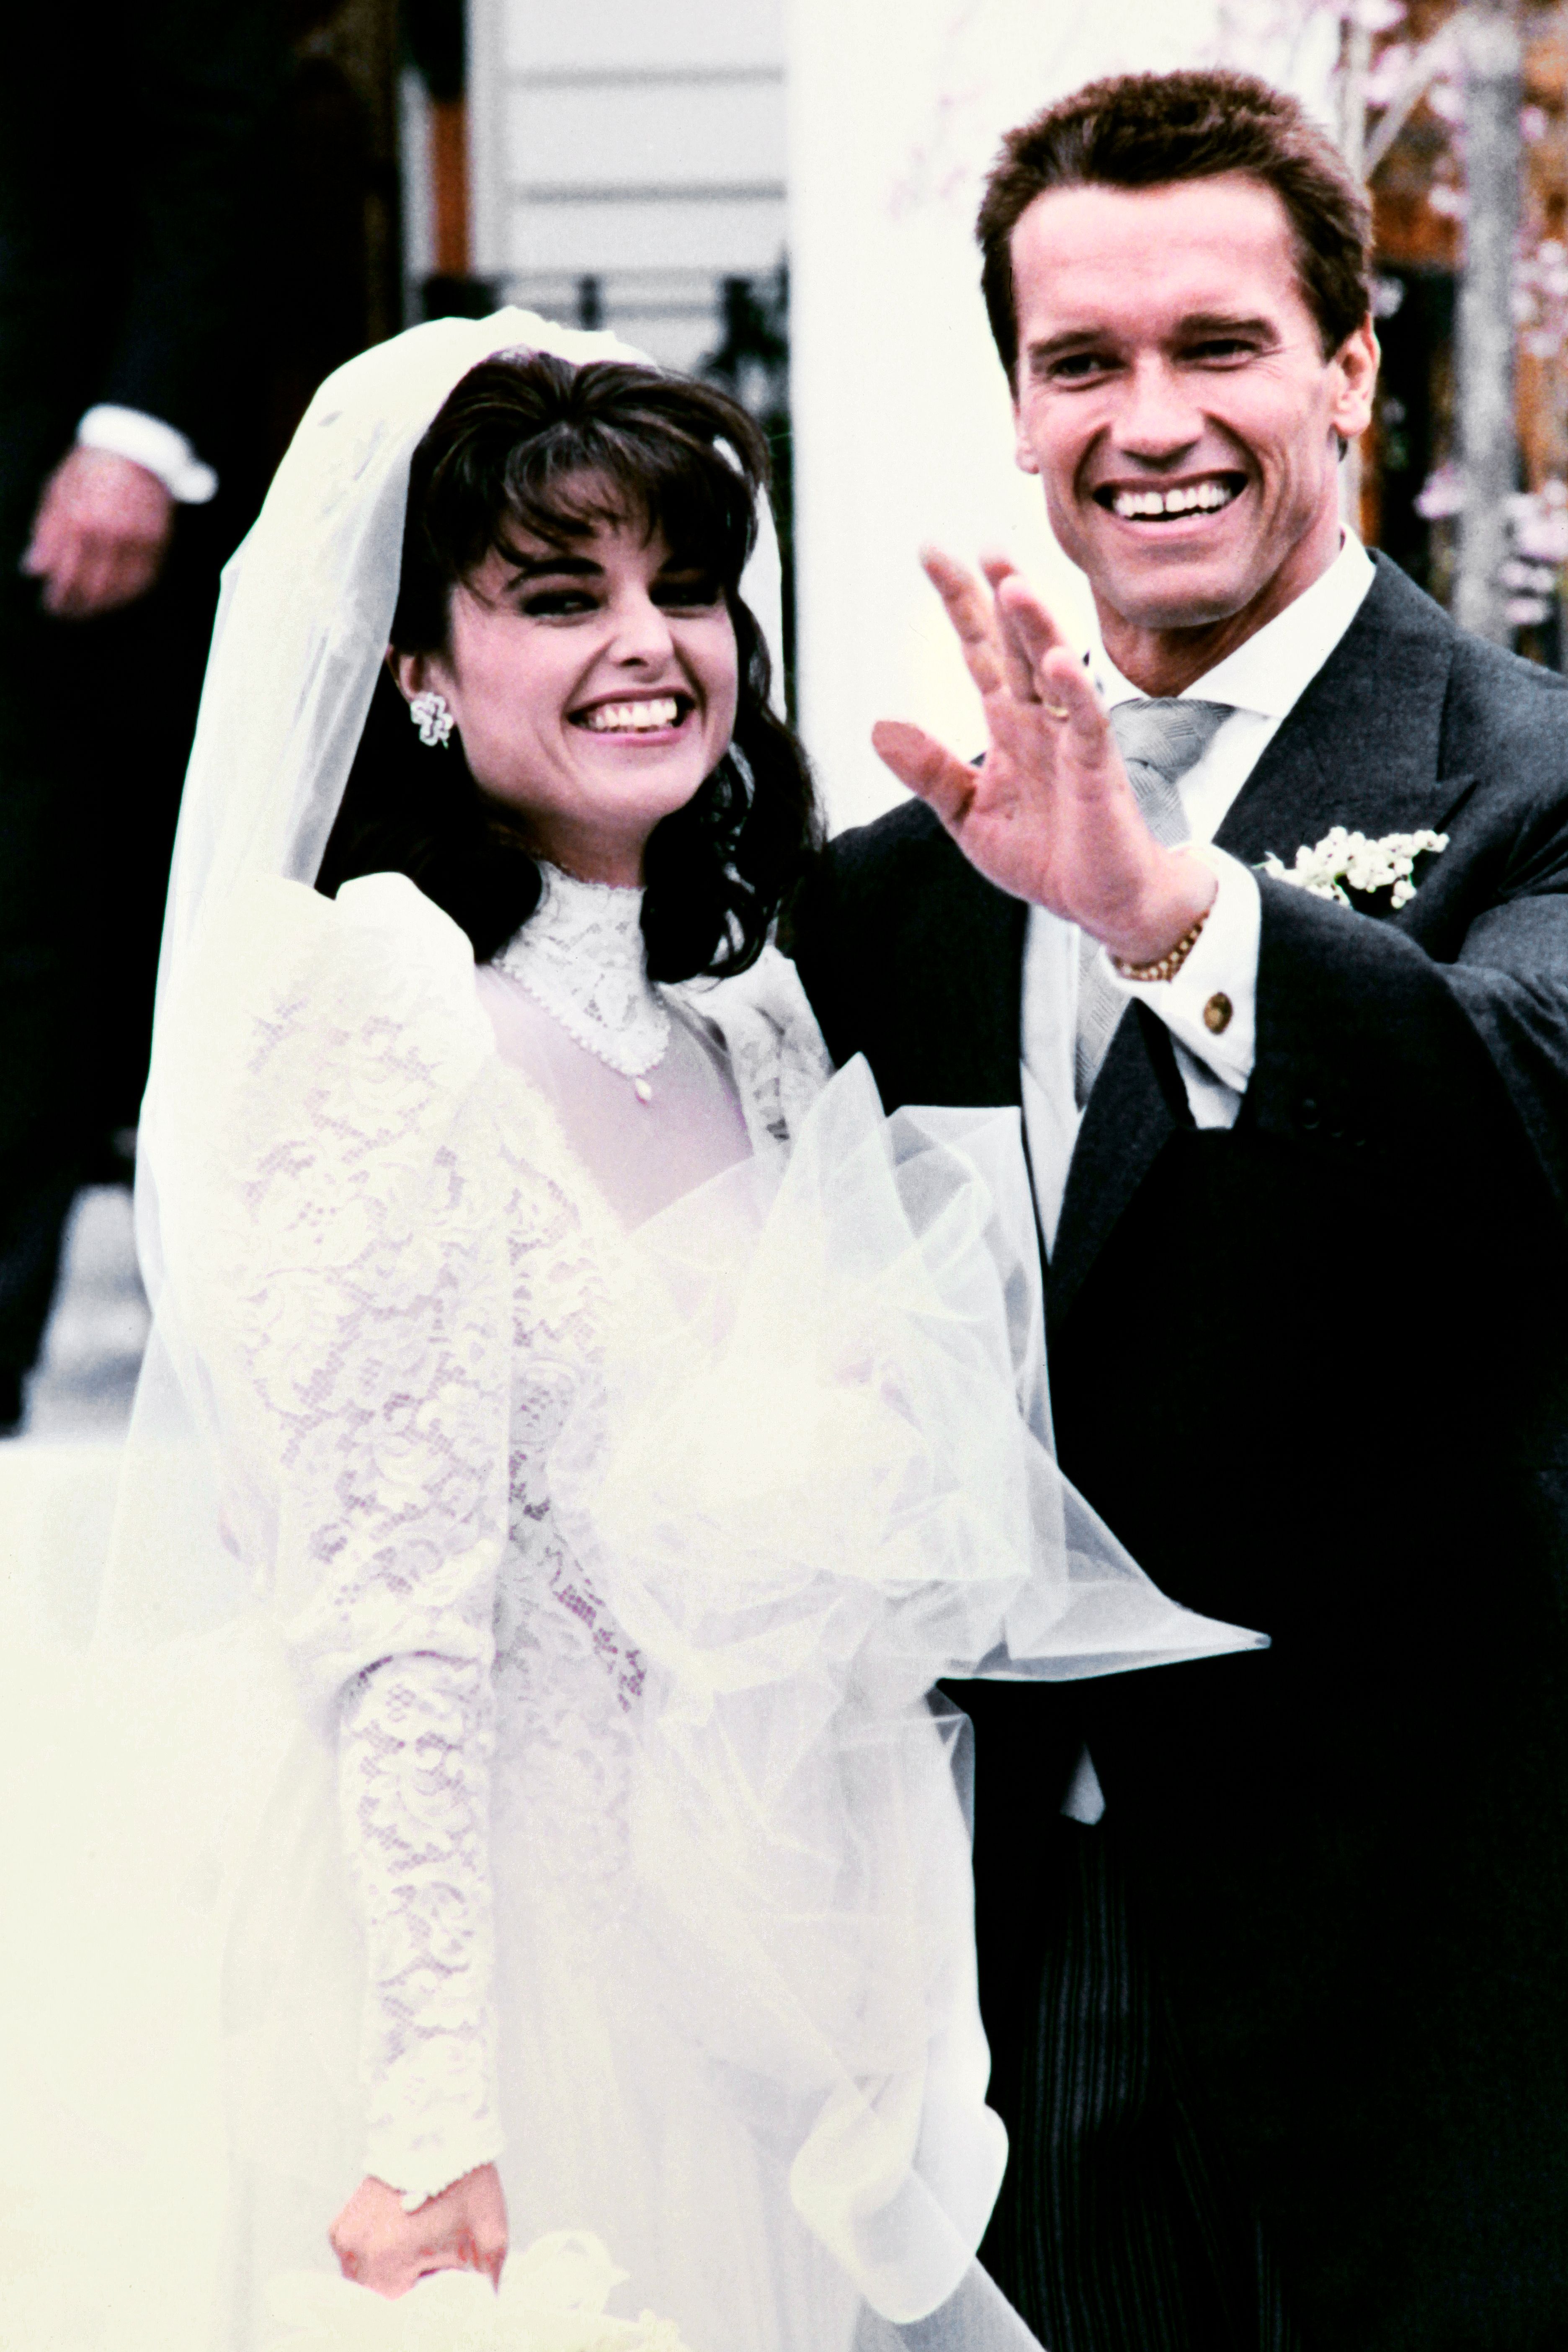 Arnold Schwarzenegger and Maria Shriver tie the knot in Massachusetts on April 26, 1986. | Source: Getty Images